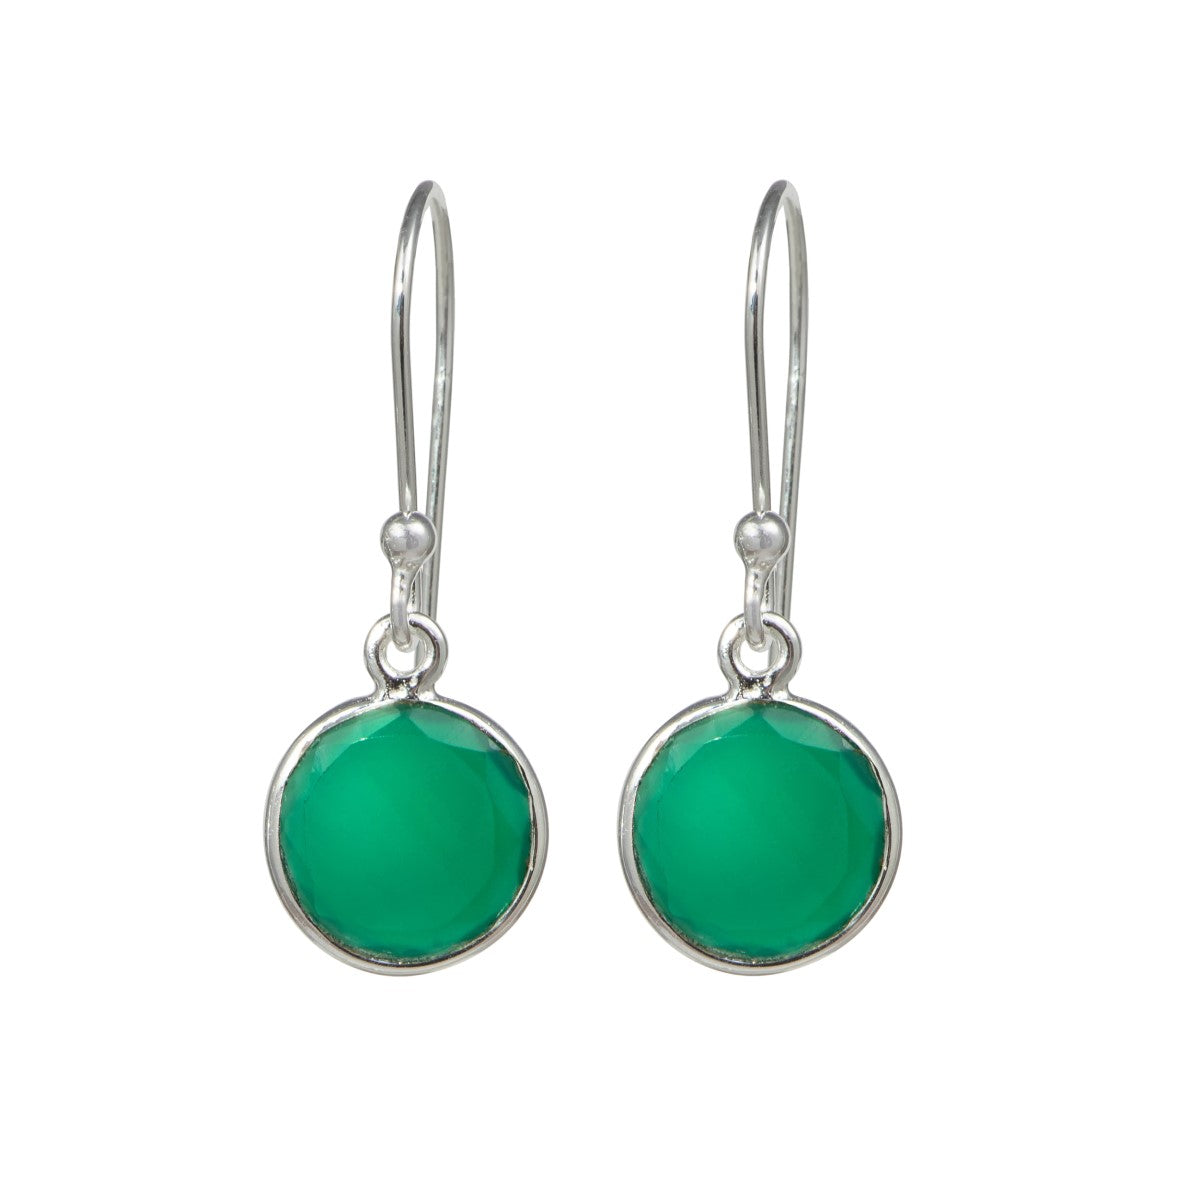 Green Onyx Sterling Silver Earrings with a Round Faceted Gemstone Drop